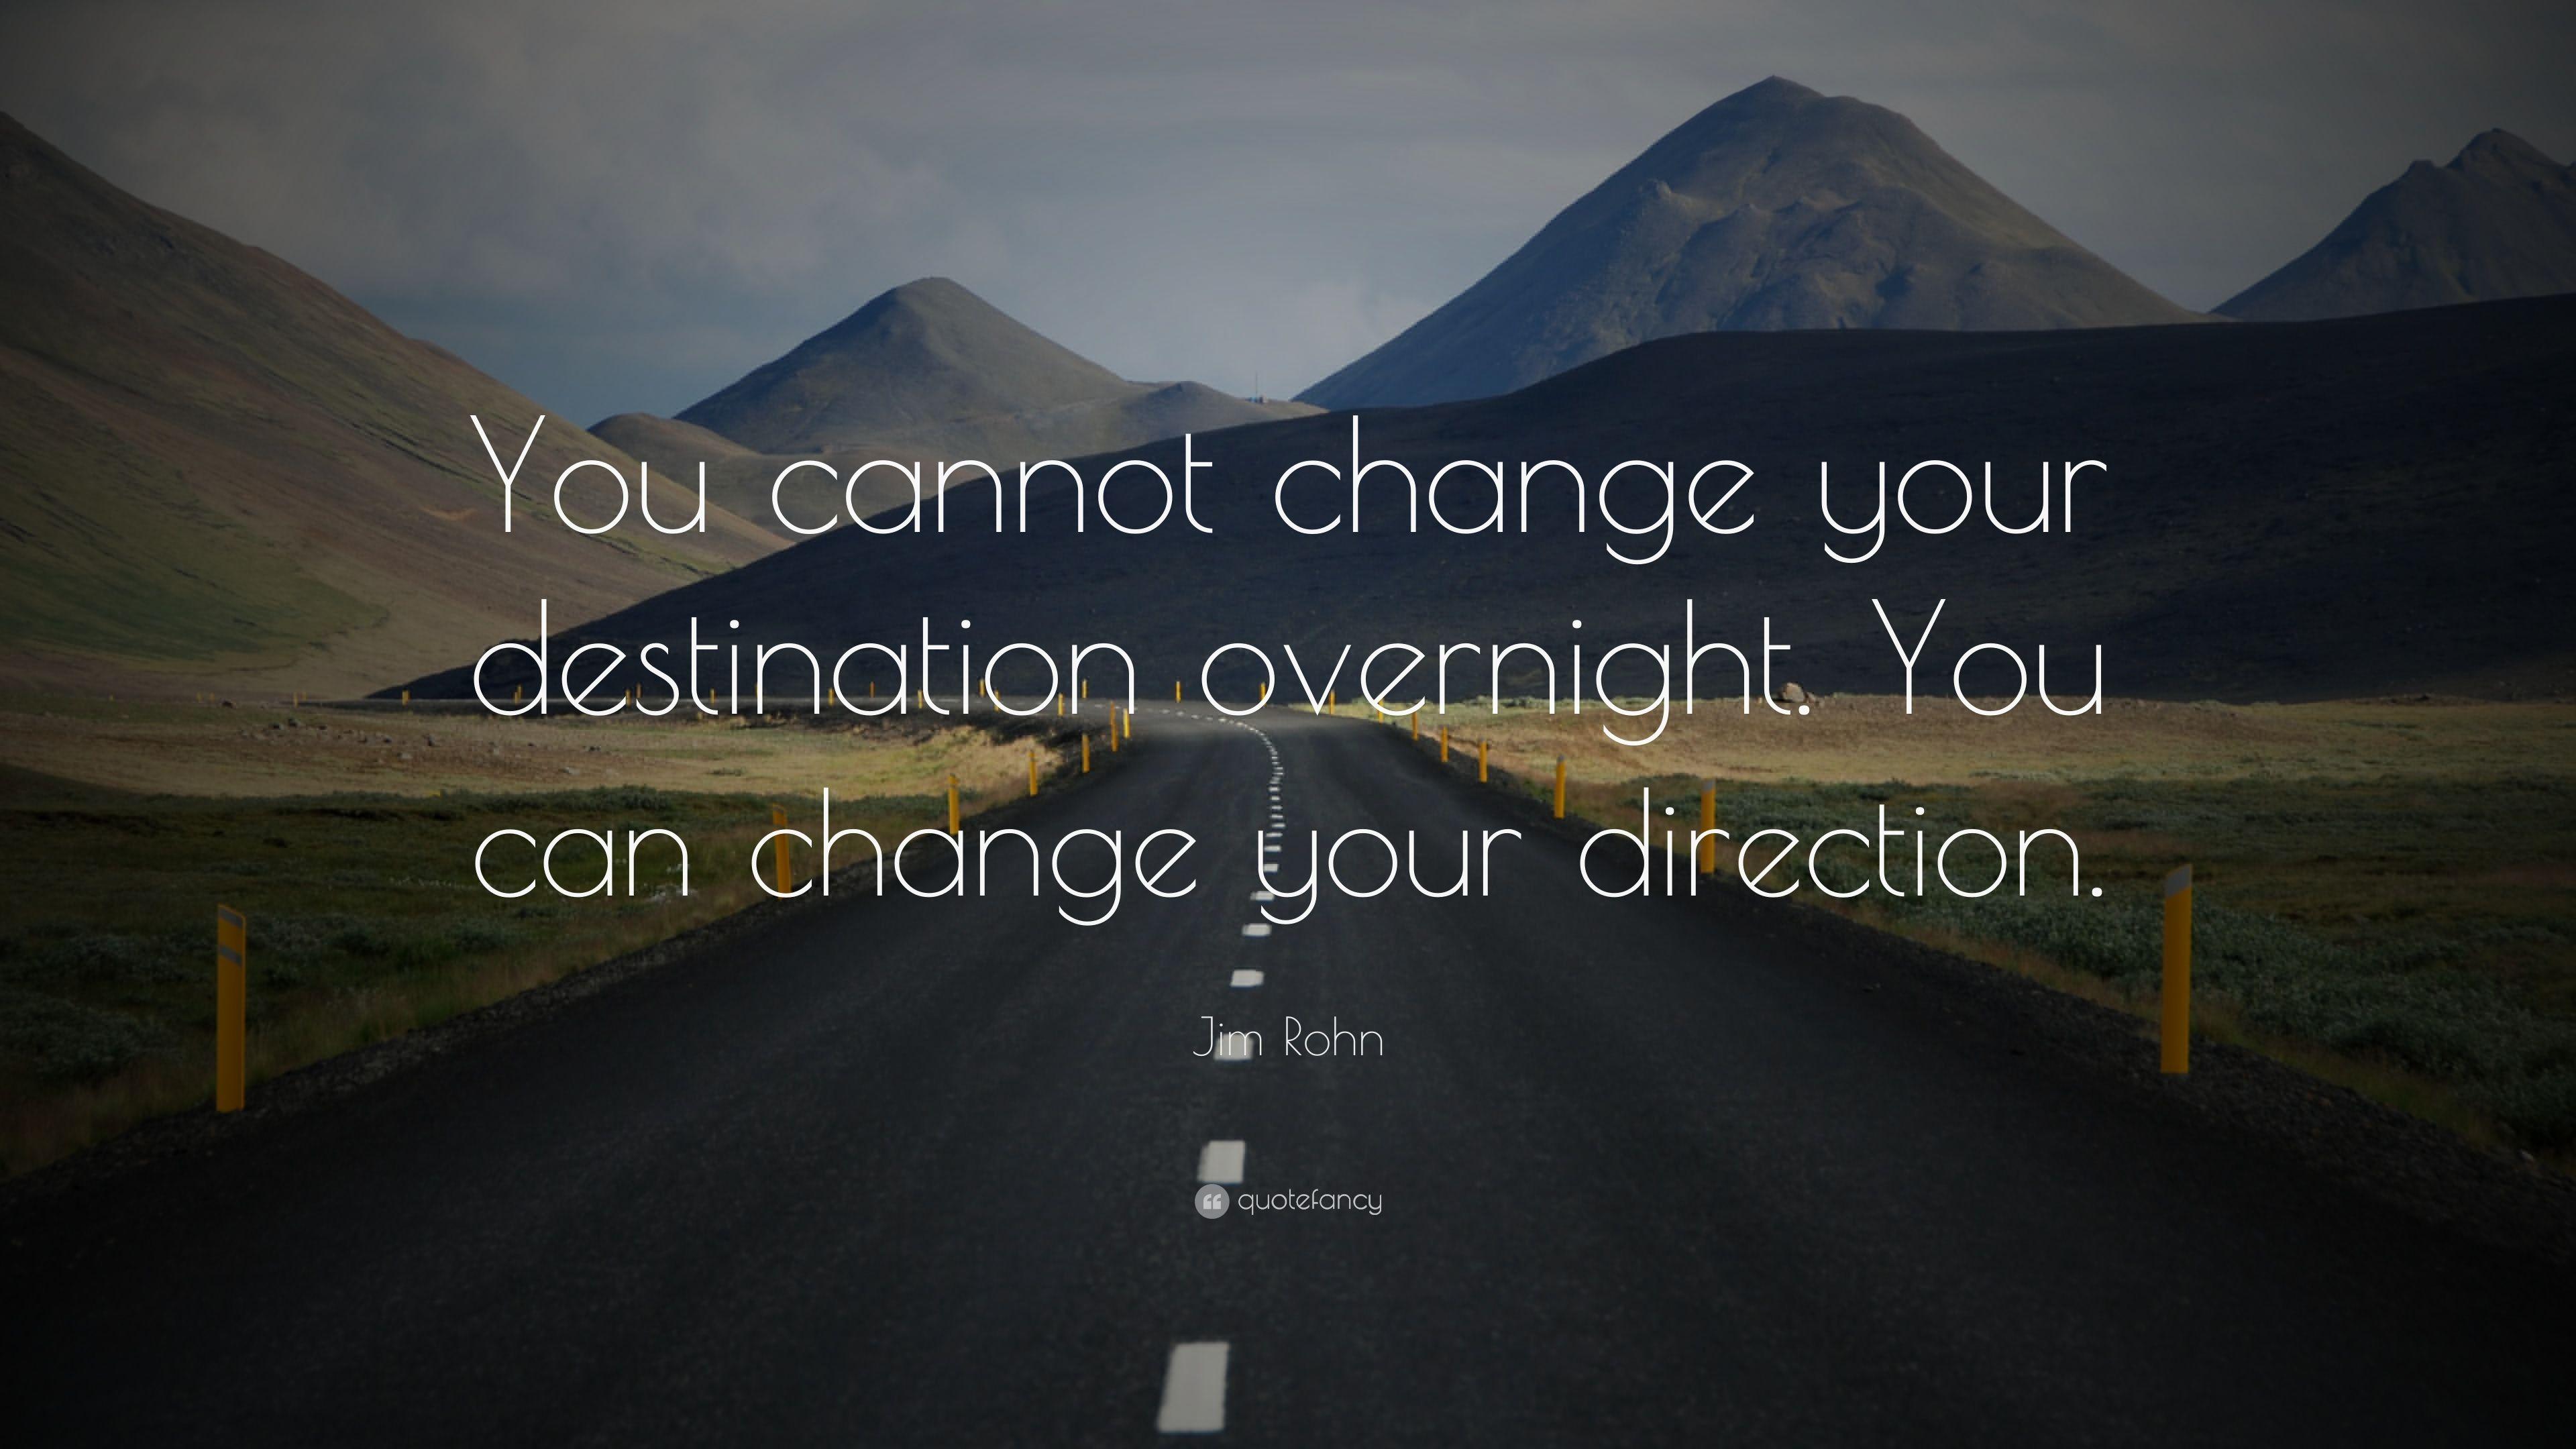 Jim Rohn Quote: “You cannot change your destination overnight. You